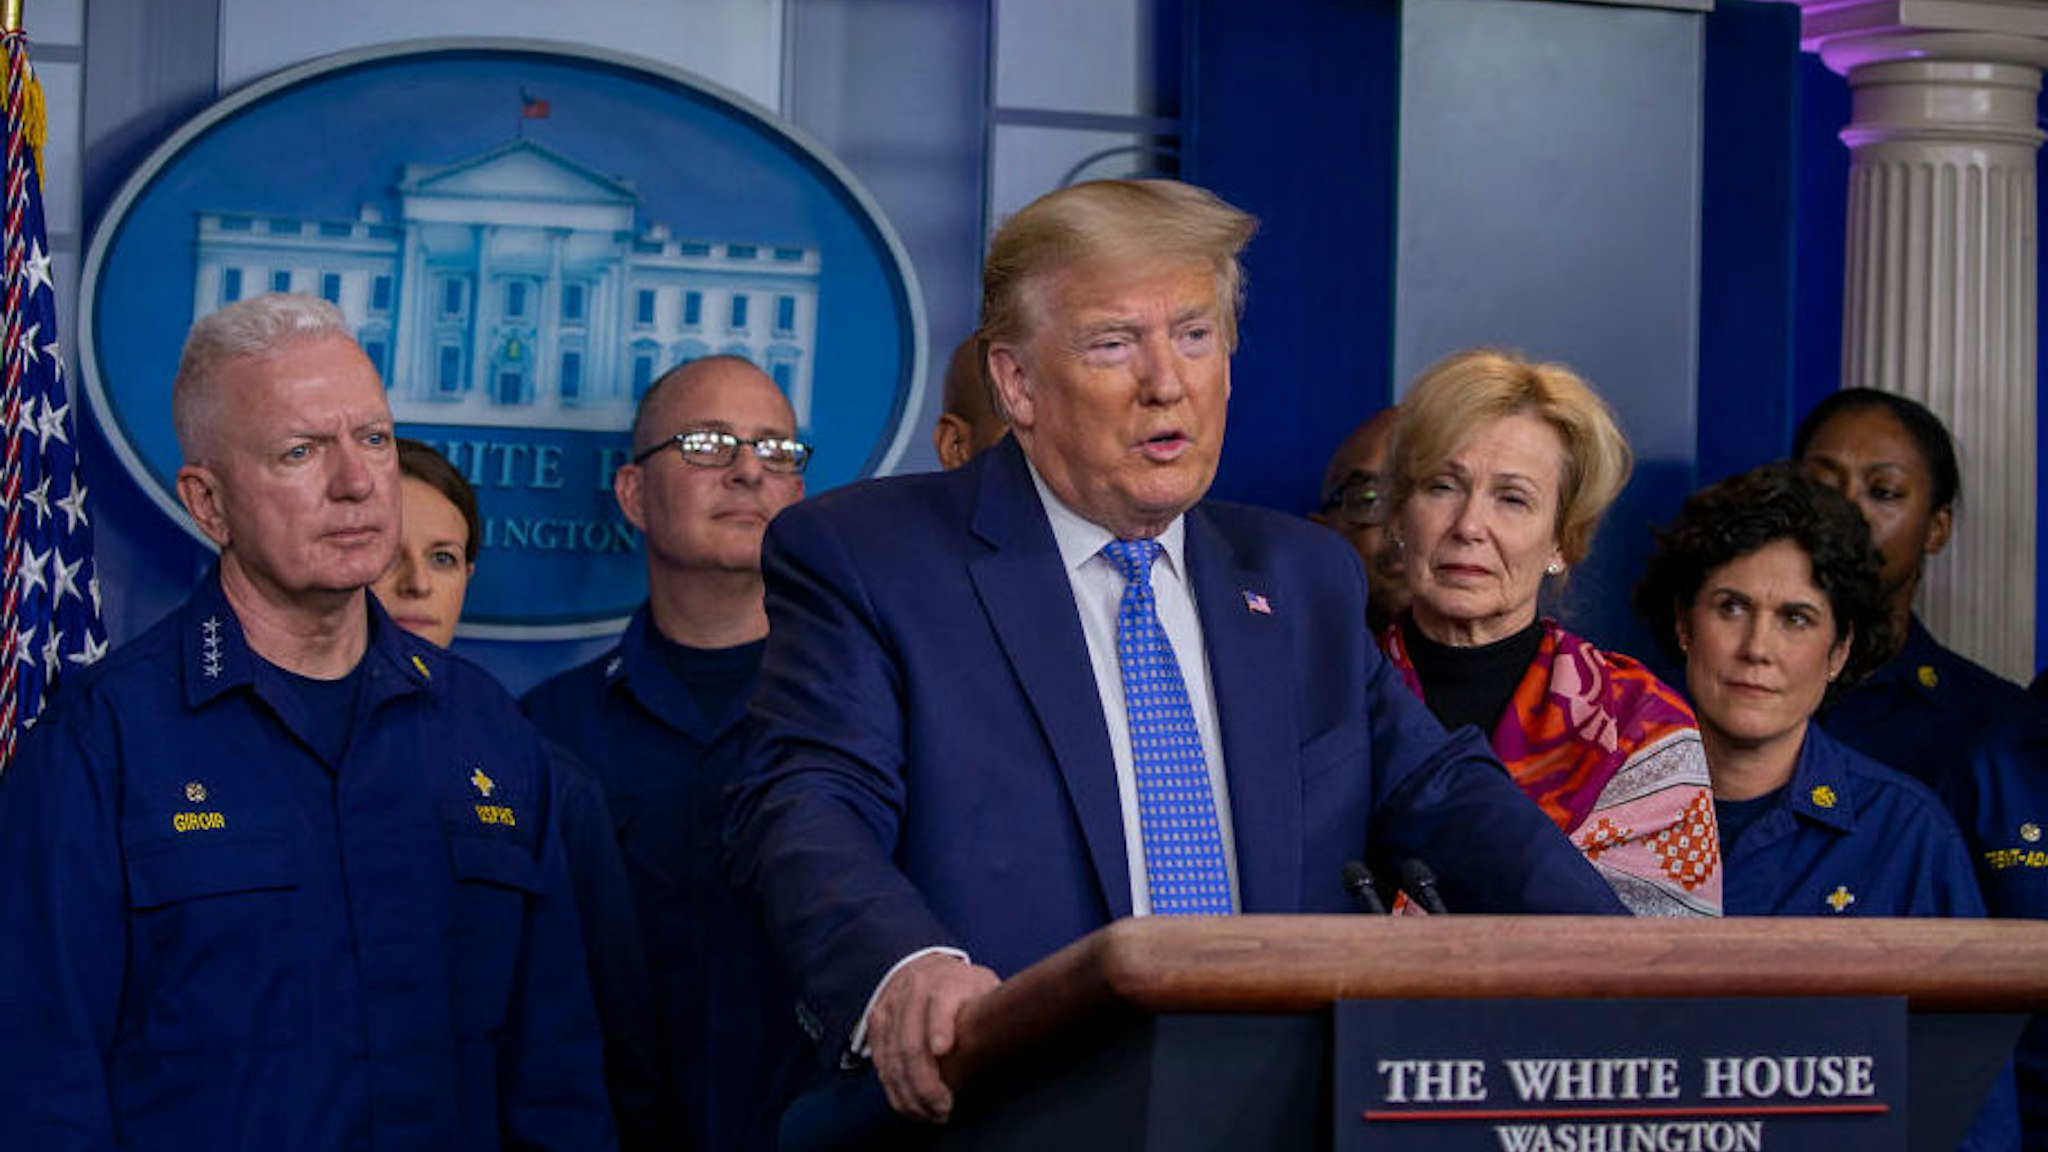 U.S. President Donald Trump speaks to the media in the press briefing room at the White House on March 15, 2020 in Washington, DC. The United States has surpassed 3,000 confirmed cases of the coronavirus, and the death toll climbed to at least 61, with 25 of the deaths associated with the Life Care Center in Kirkland, Washington. (Photo by Tasos Katopodis/Getty Images)